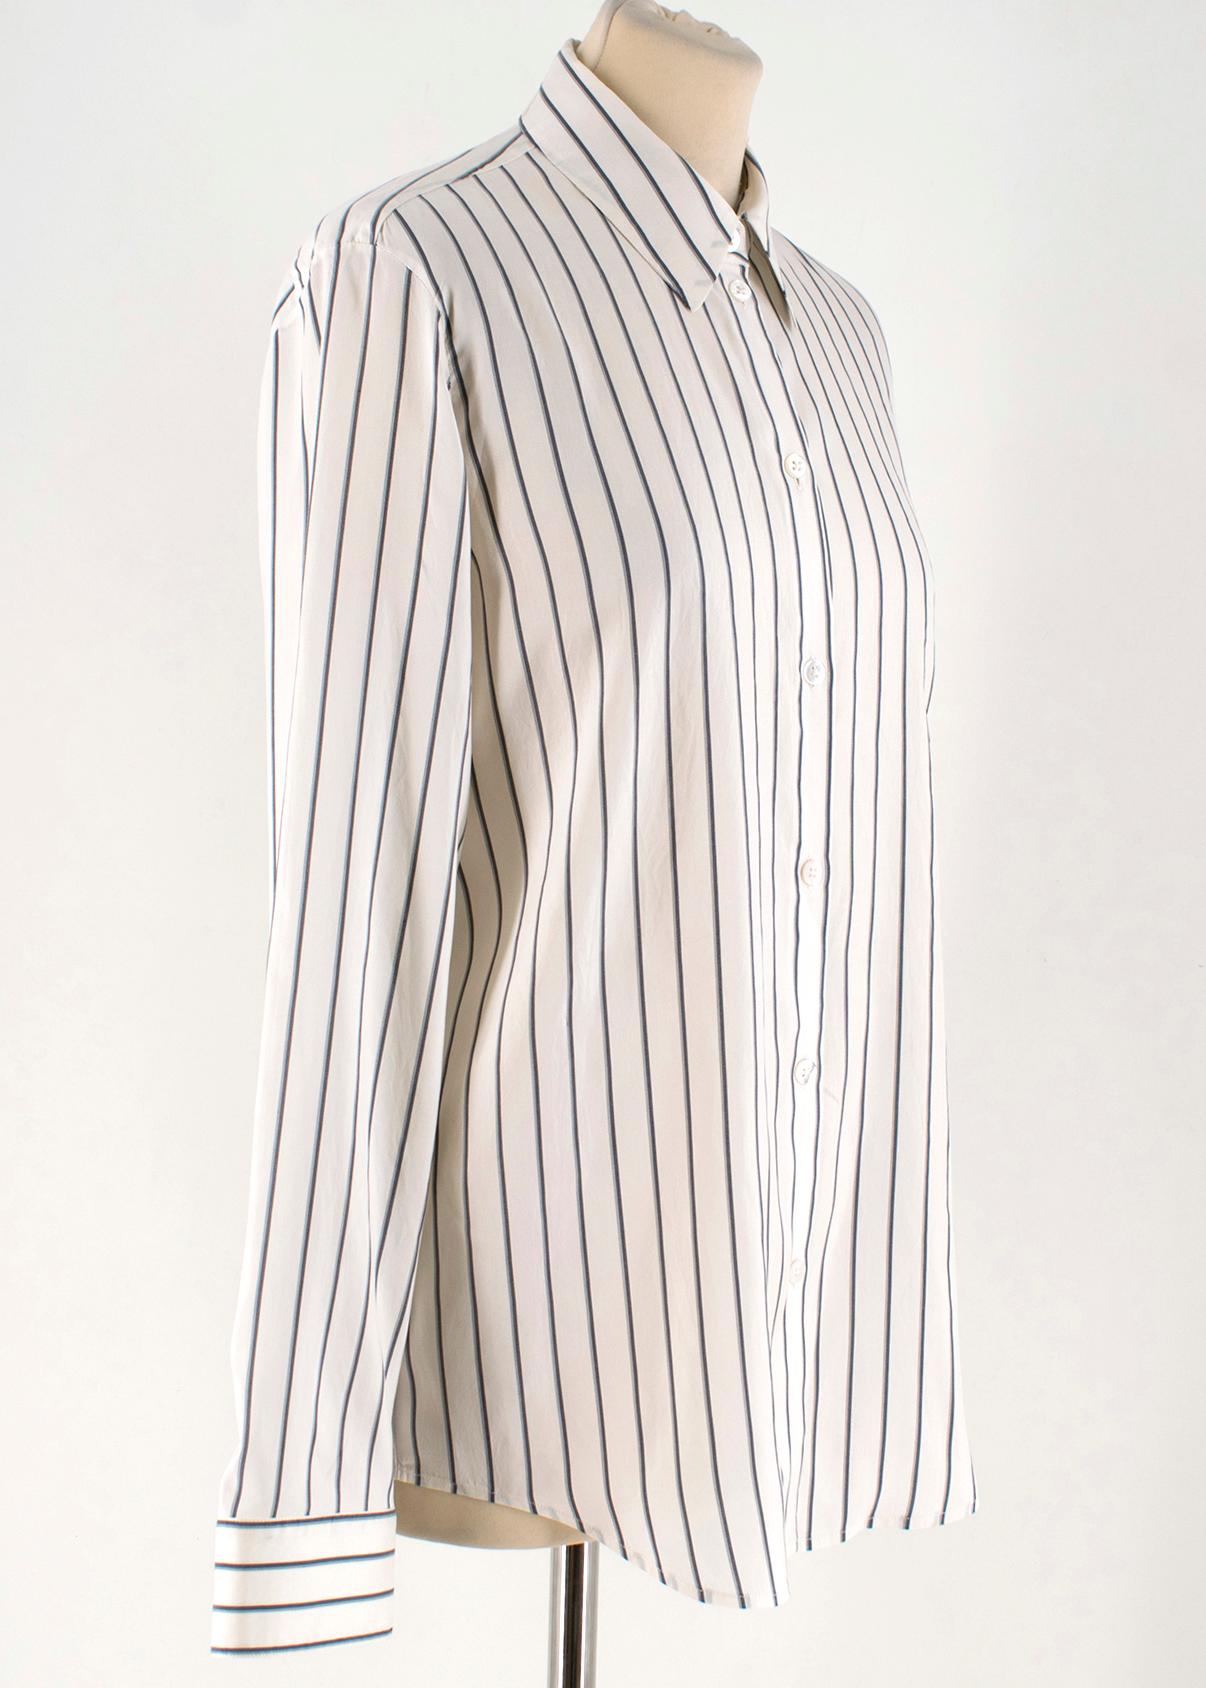 The Row Cream Striped Silk 'Peter' Shirt 

- Cream Striped Shirt
- 100% Silk
- Black striped print
- Point collar, buttoned down center front 
- Buttoned sleeve cuffs
- Lightweight

Please note, these items are pre-owned and may show some signs of